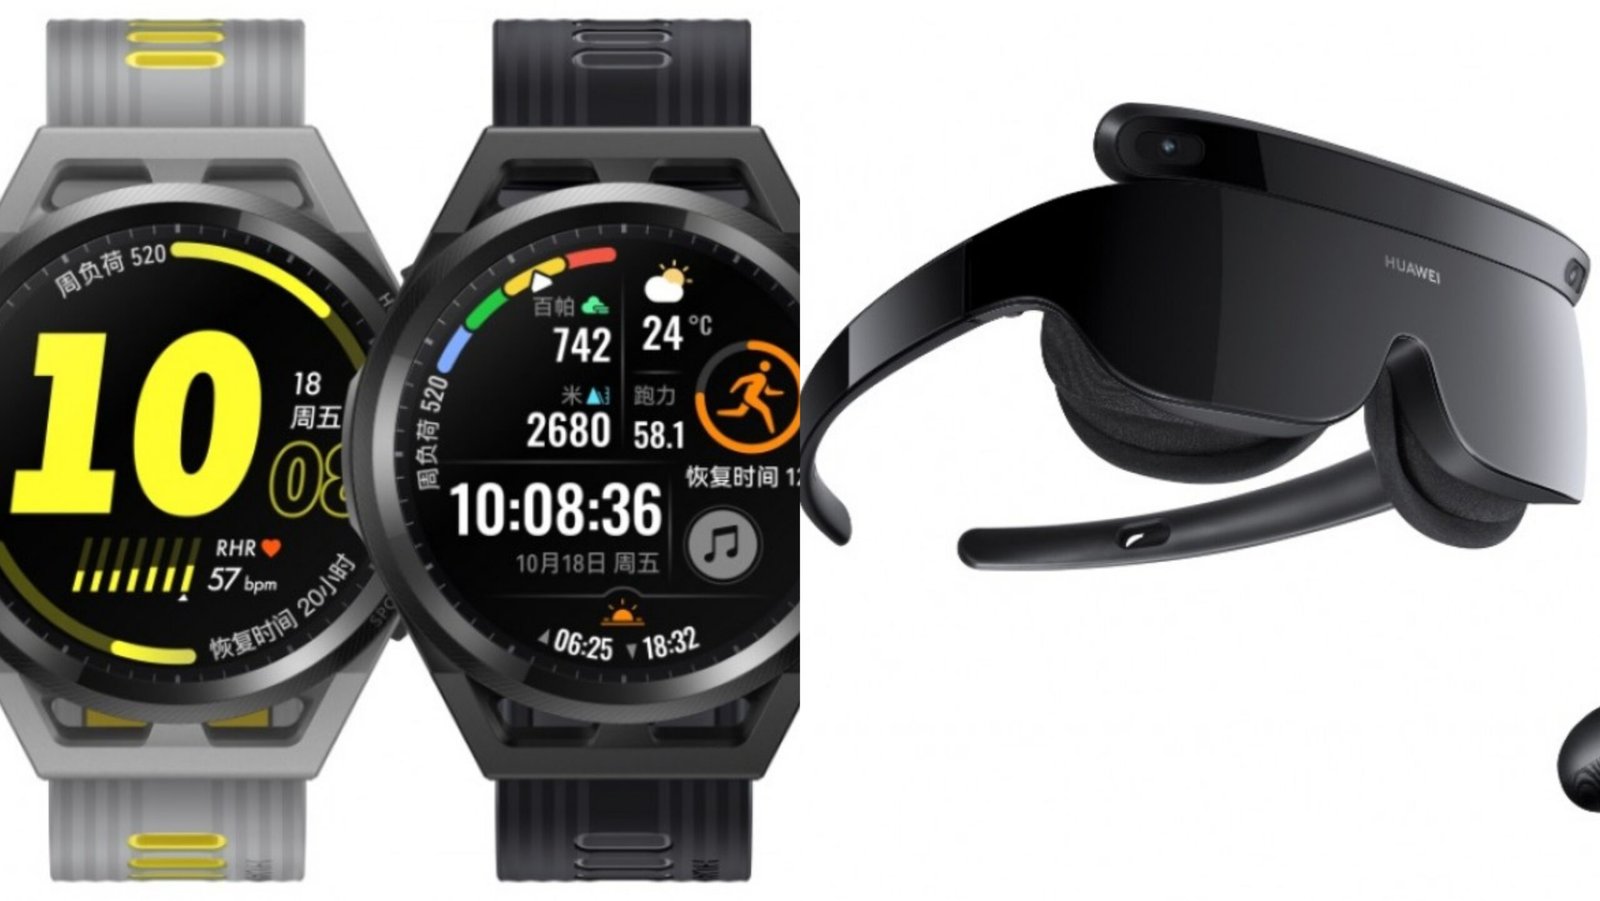 Huawei-Watch-GT-Runner-and-Huawei-VR-Glass-6DoF-launched-in-China